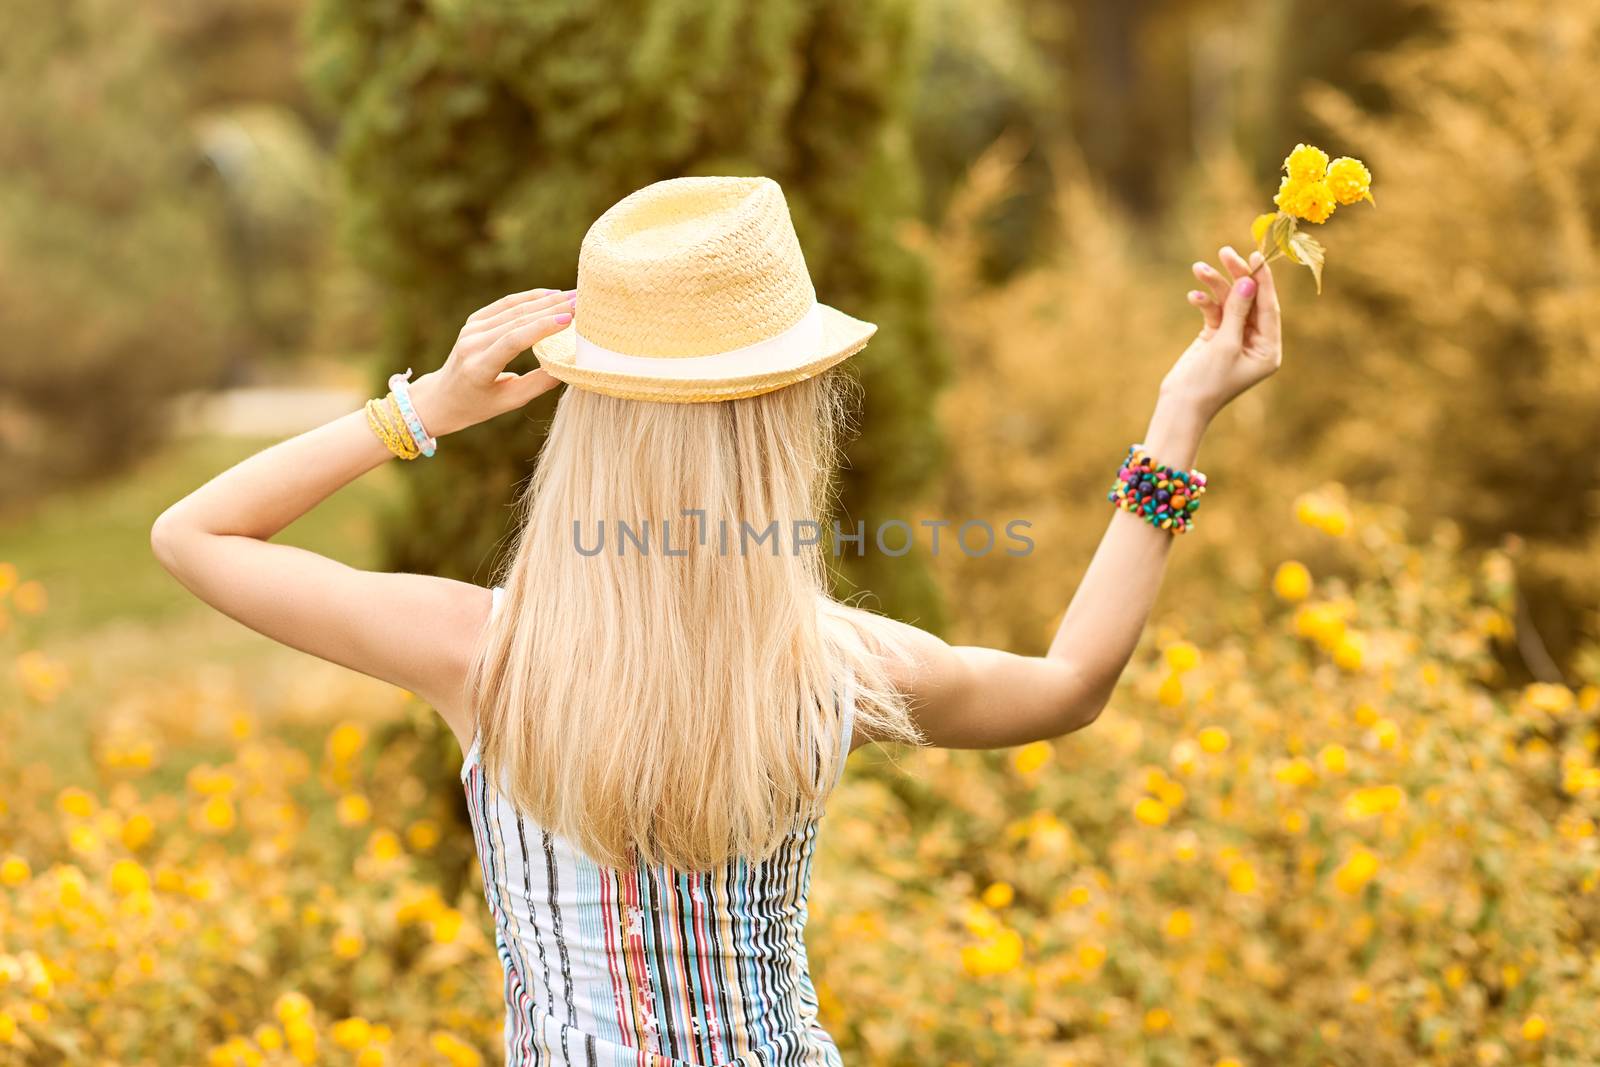 Beauty playful woman relax in summer garden dreaming, people, outdoors, bokeh. Attractive happy blonde girl in hat with flower enjoying nature, harmony on meadow, lifestyle.Sunny day, forest,copyspace